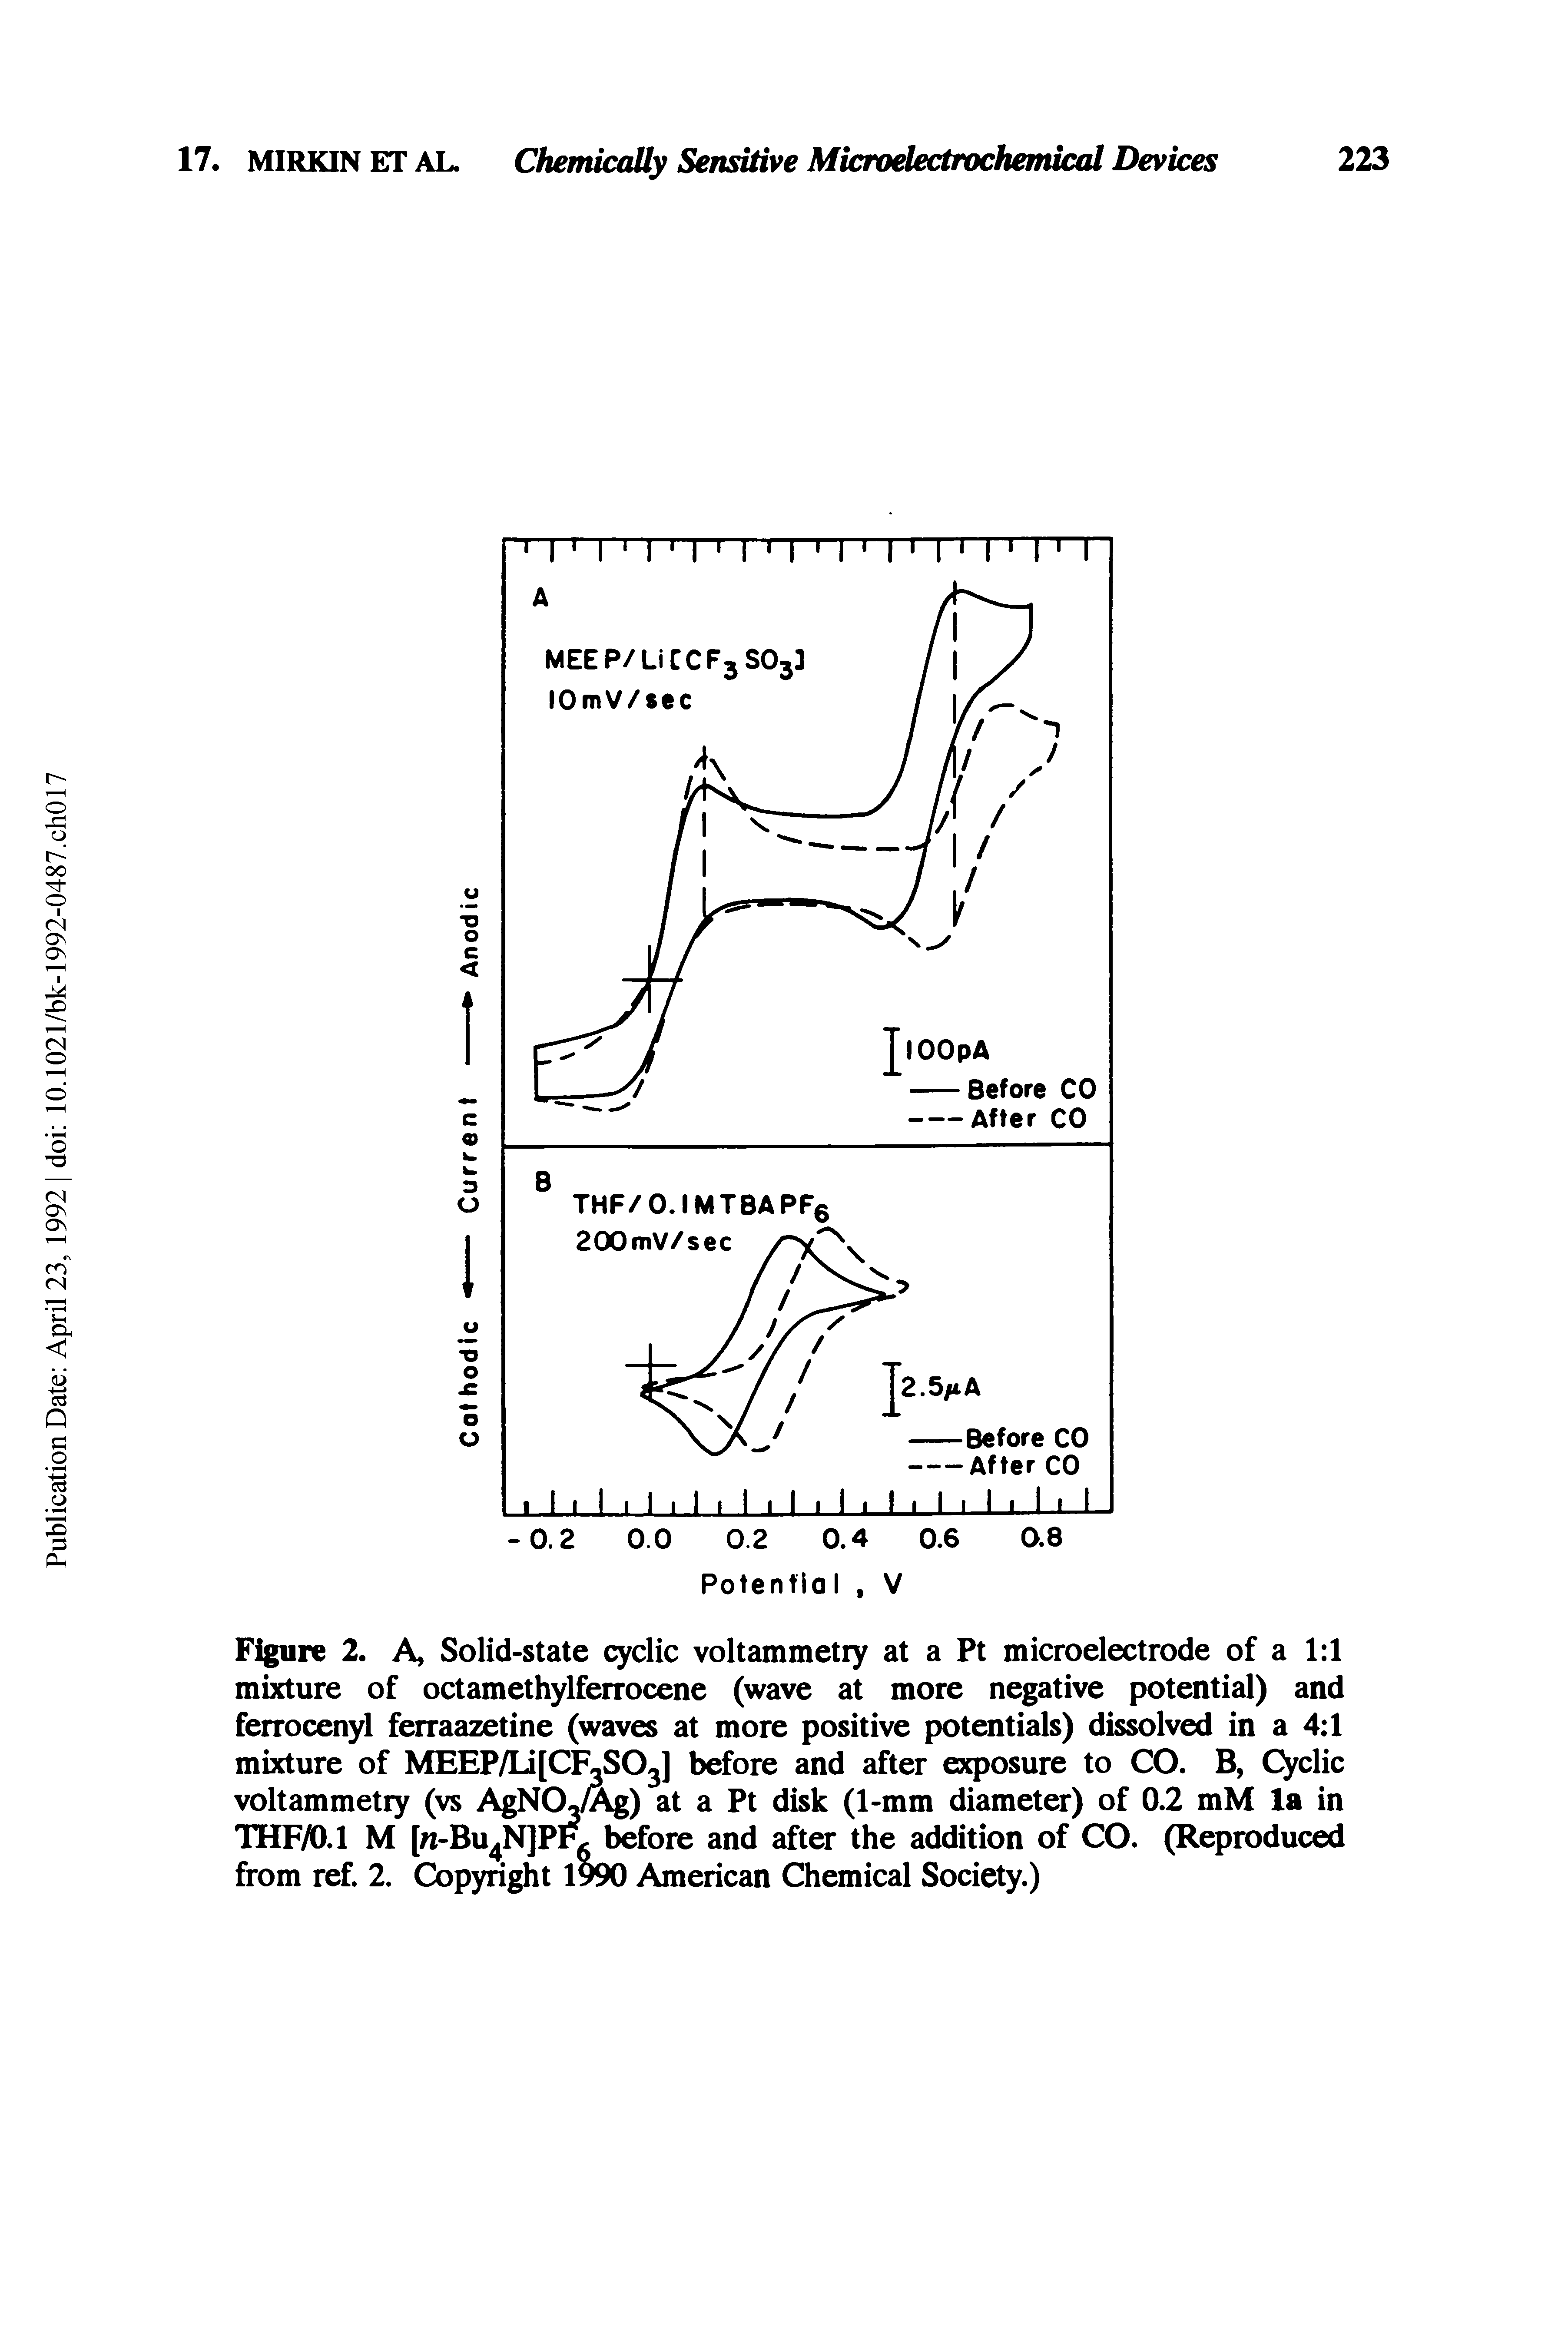 Figure 2. A, Solid-state cyclic voltammetry at a Pt microelectrode of a 1 1 mixture of octamethylferrocene (wave at more negative potential) and ferrocenyl ferraazetine (waves at more positive potentials) dissolved in a 4 1 mixture of MEEP/Li[CF S03] before and after exposure to CO. B, Cyclic voltammetry (vs AgNOJAg) at a Pt disk (1-mm diameter) of 0.2 mM la in THF/0.1 M [n-Bu4N]PF, before and after the addition of CO. (Reproduced from ref. 2. Copyright 1990 American Chemical Society.)...